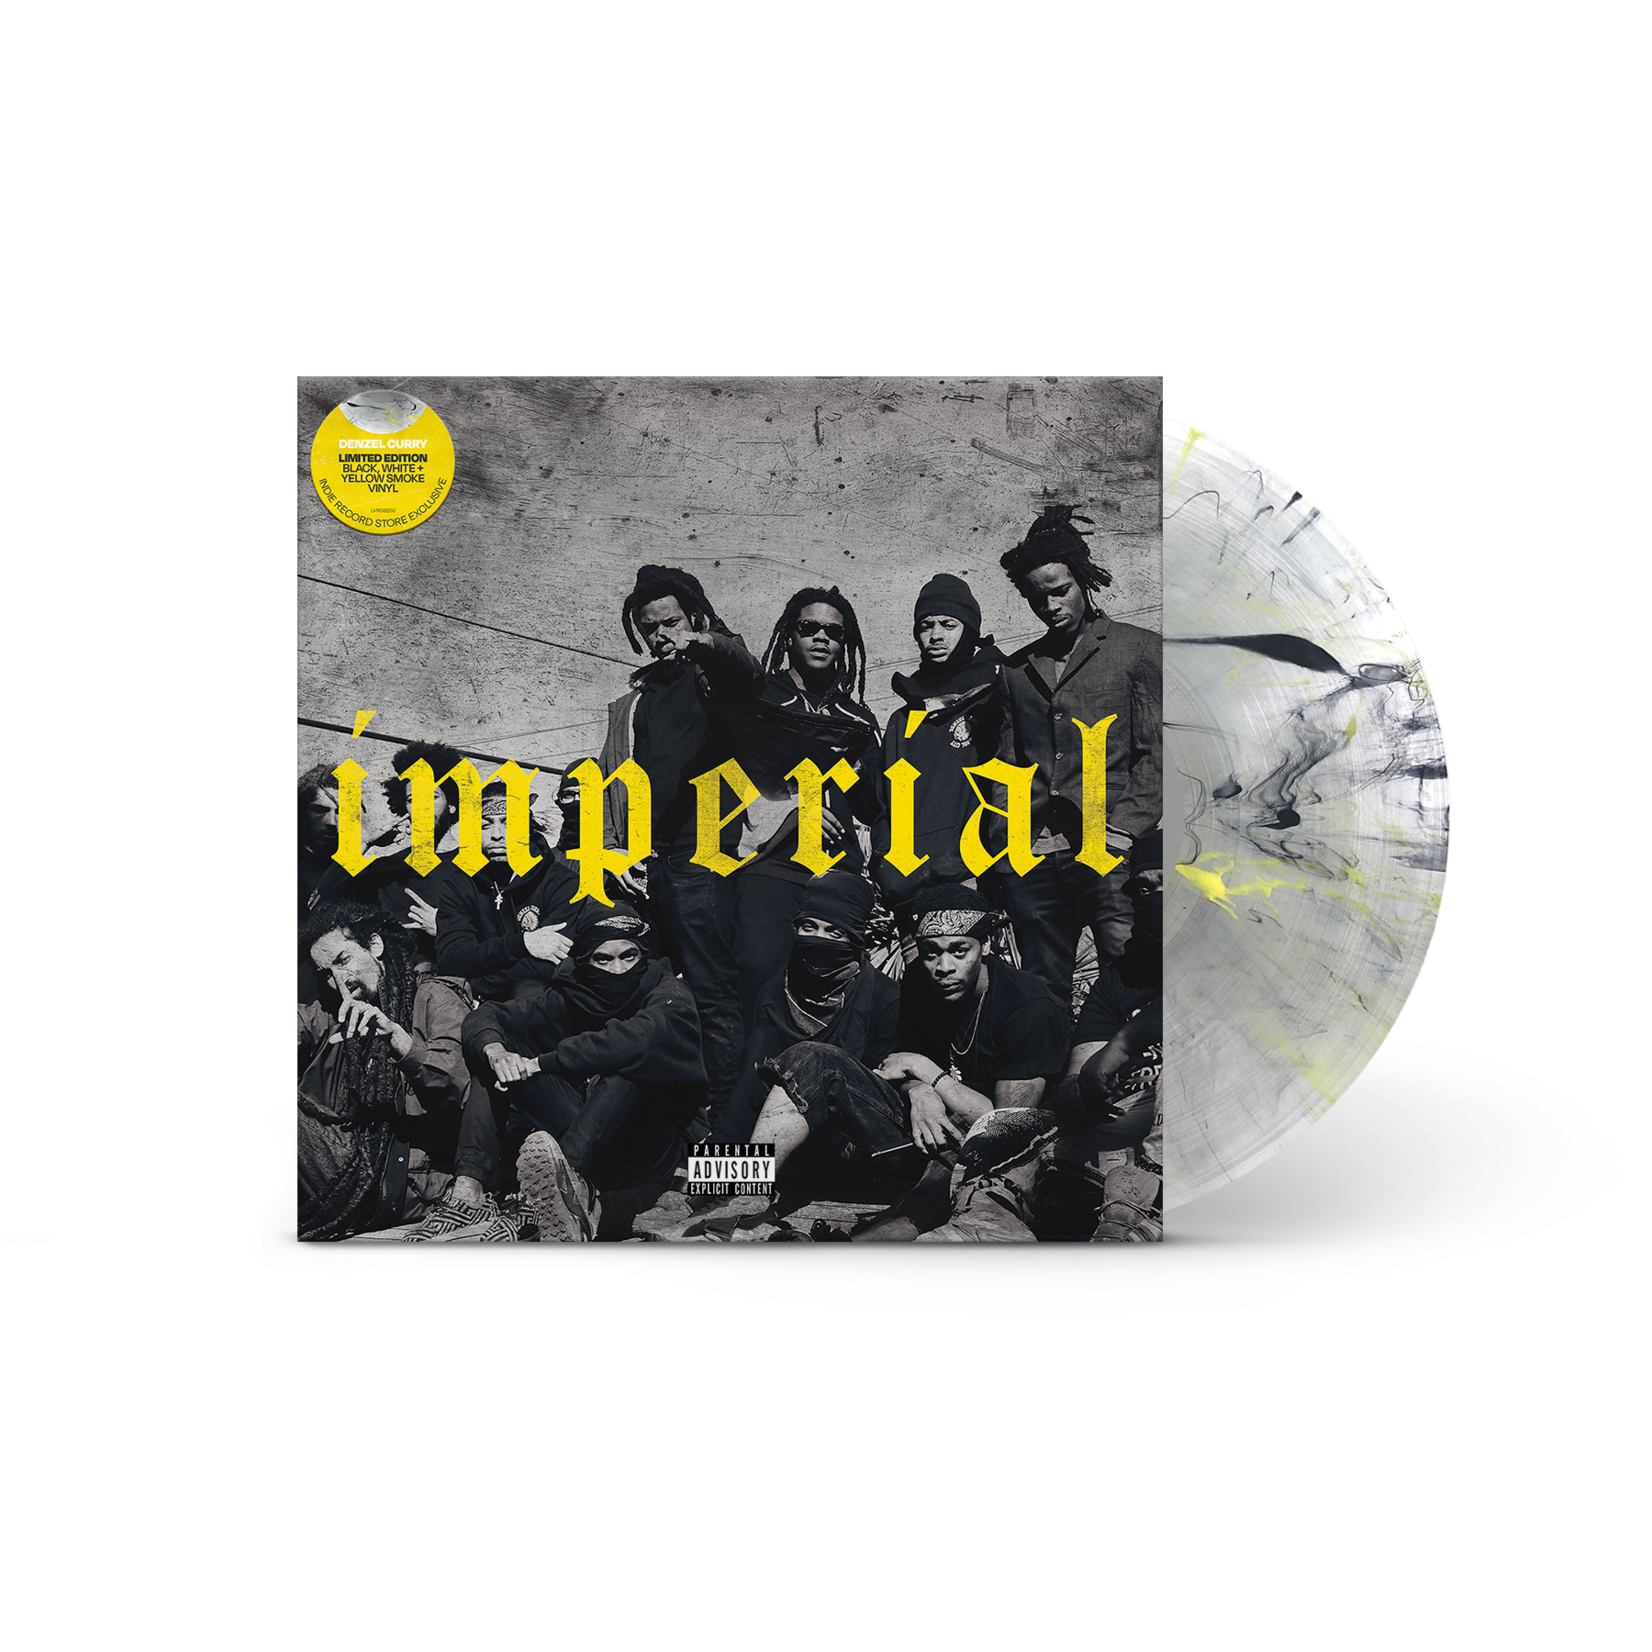 Loma Vista Denzel Curry - Imperial (LP) [Black/White/Yellow]